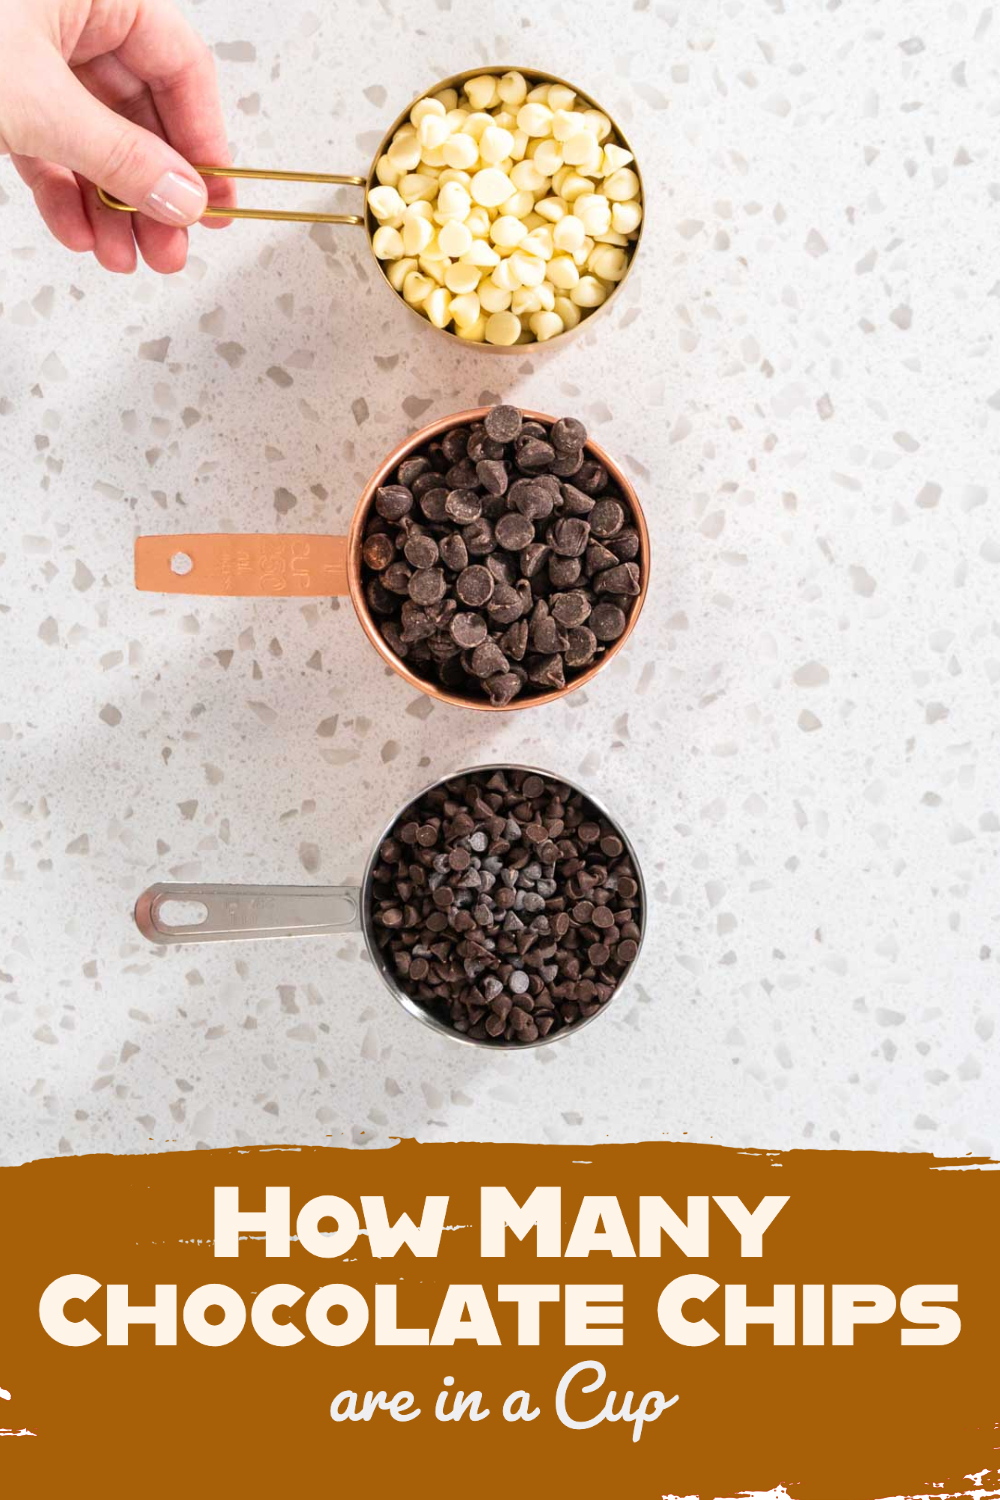 How Many Chocolate Chips are in a Cup